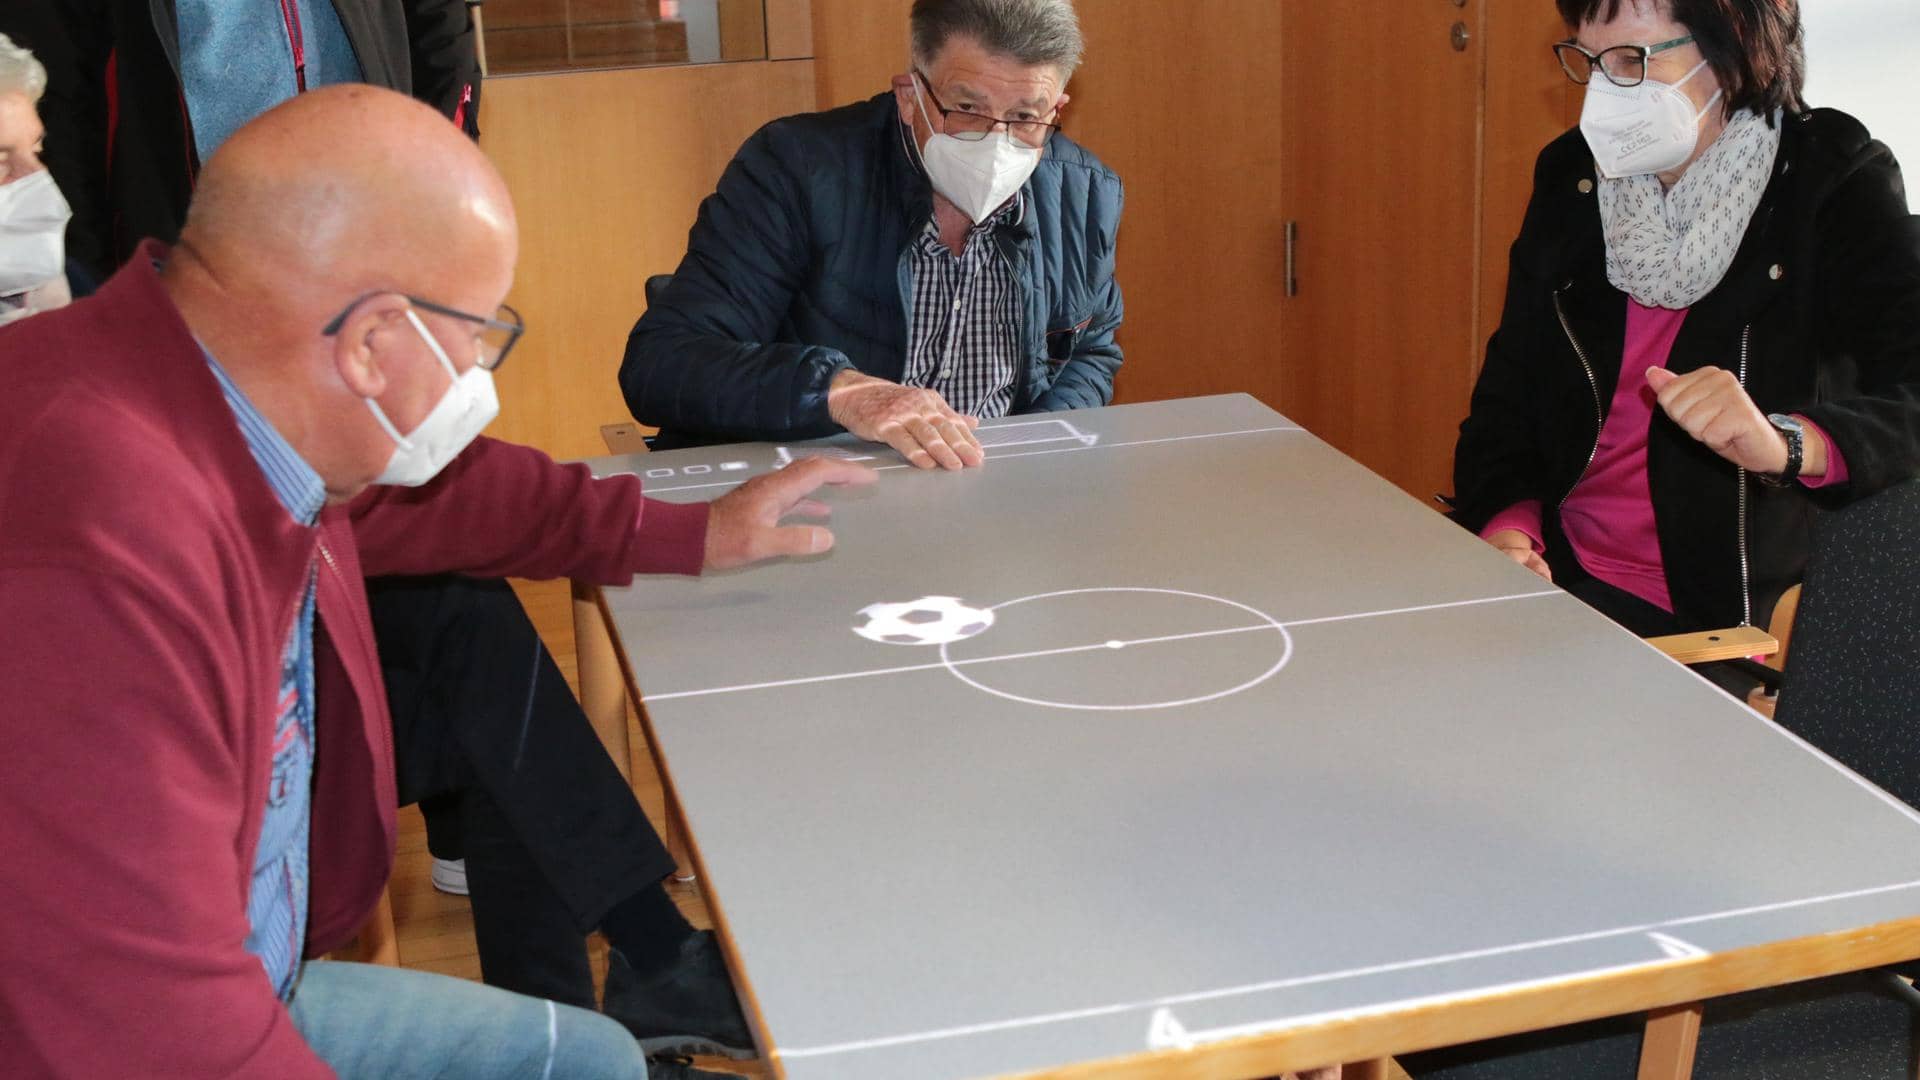 Two men and a woman at a table with a virtual soccer field